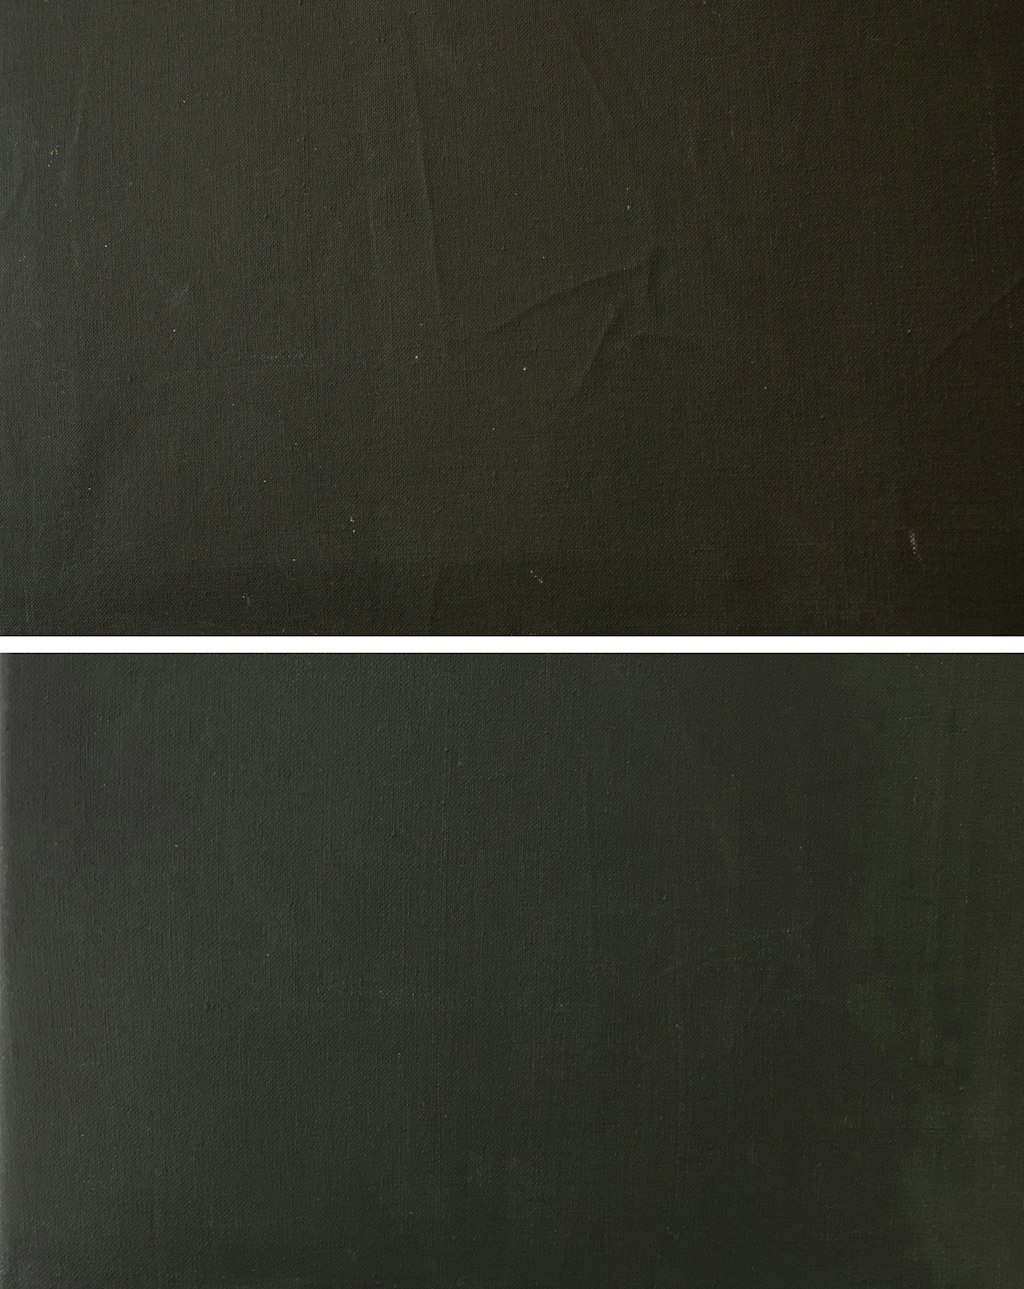 Detail of an area with creases and abrasions before (top) and after (bottom) treatment